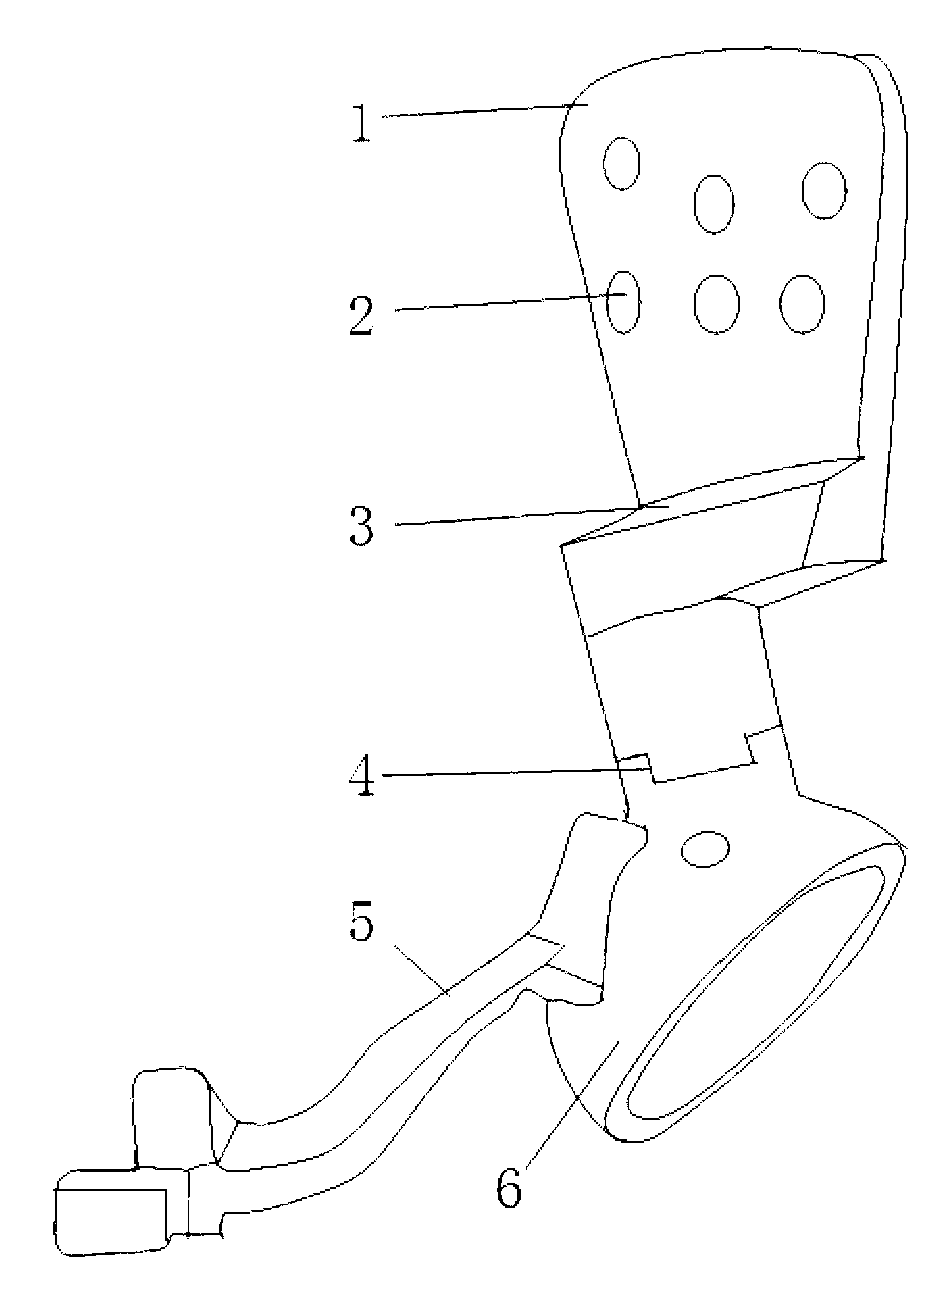 Ilium fixing piece with self-locking nail hole and supporting platform and for semi-pelvic prosthesis